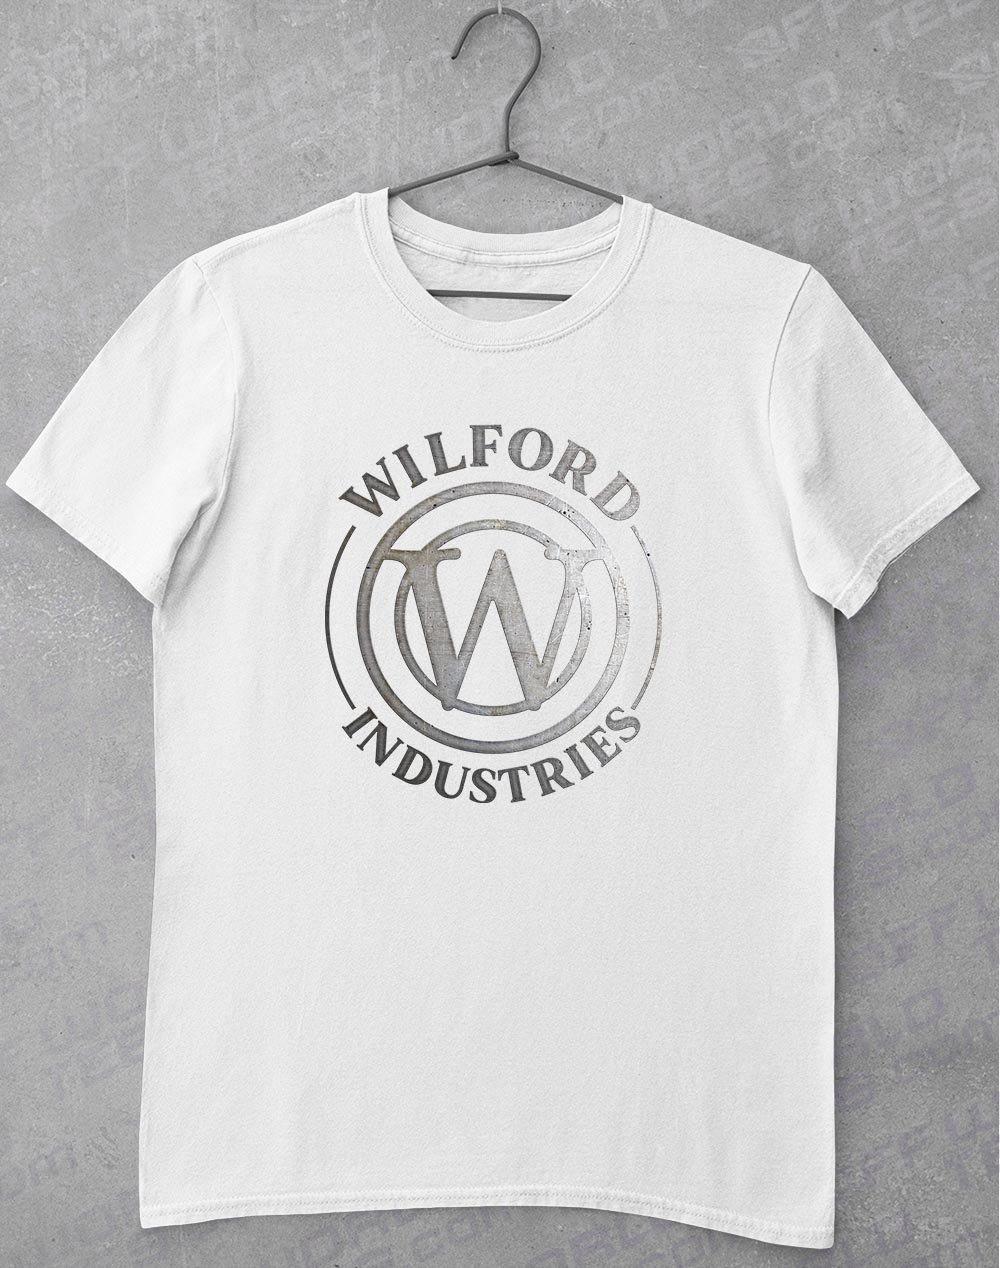 Wilford Industries T-Shirt S / White  - Off World Tees